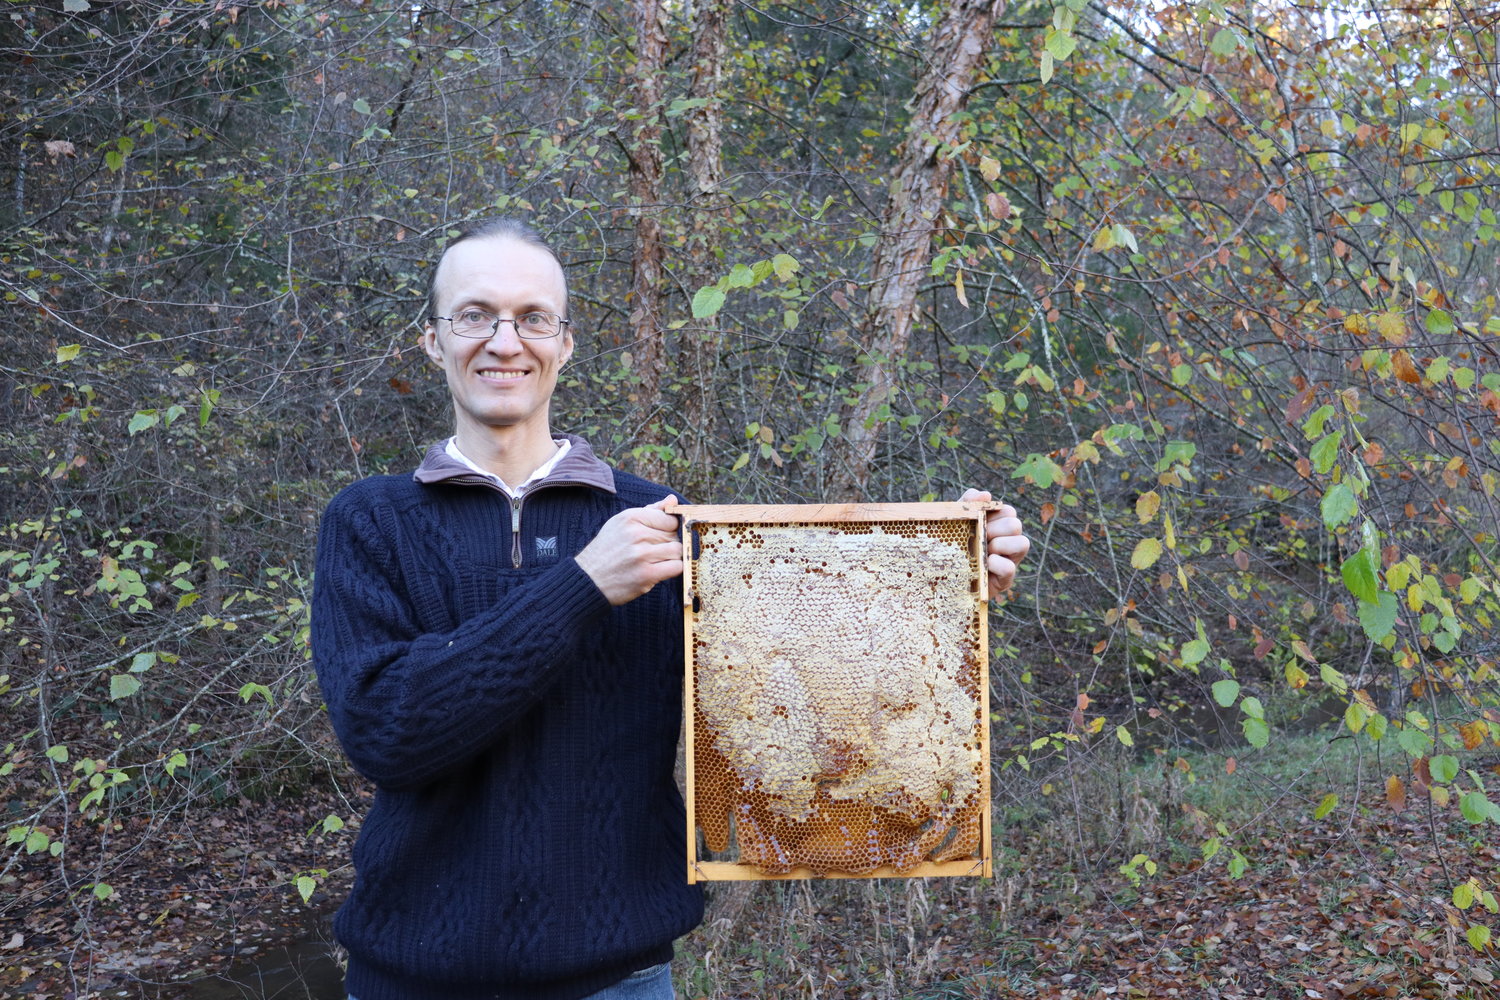 Dr. Leo Sharashkin is seen here with one of his hives from a horizontal hive box. He mentions that because this method does not aggravate the bees, “There is little defensive response from the bees that I can open my hives without any protection. My children help me without any protective jackets. It is not because I’m a special person or a bee whisperer. No, if you do not disturb the bees, they have no reason to strike back”.